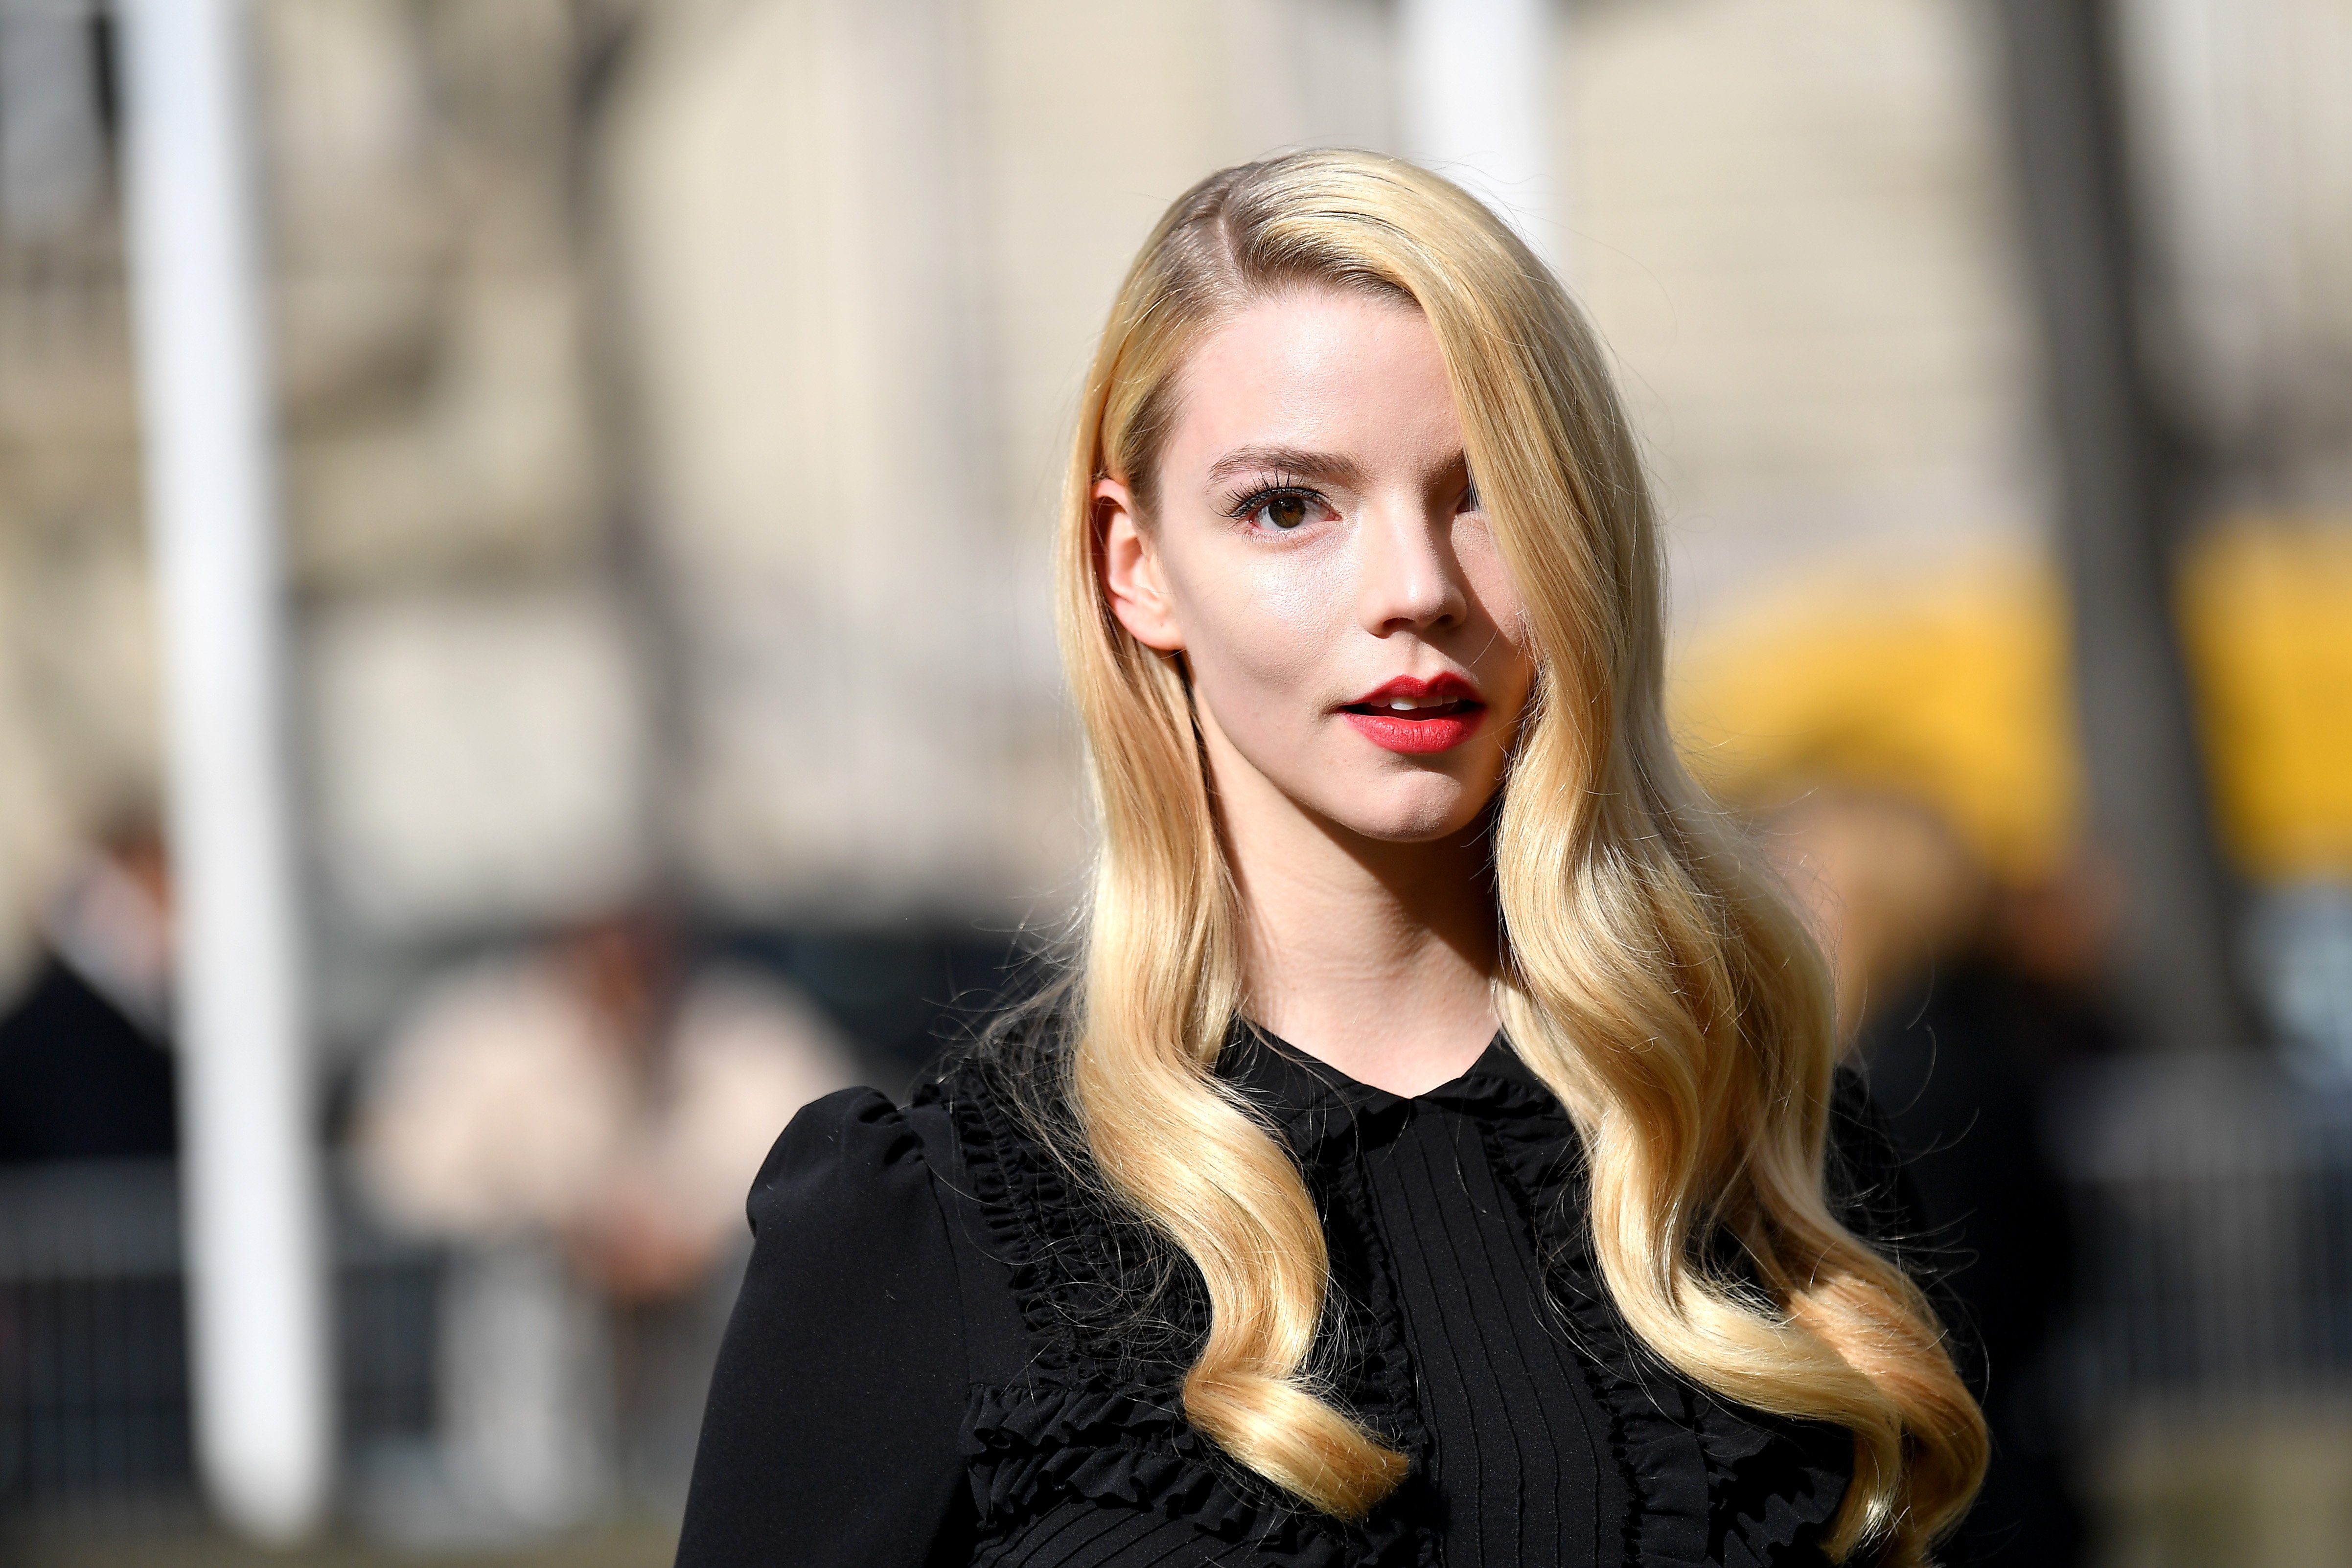 Anya Taylor-Joy pictured at the Miu Miu show during the Paris Fashion Week Womenswear Fall/Winter 2020/2021, Paris, France. | Photo: Getty Images